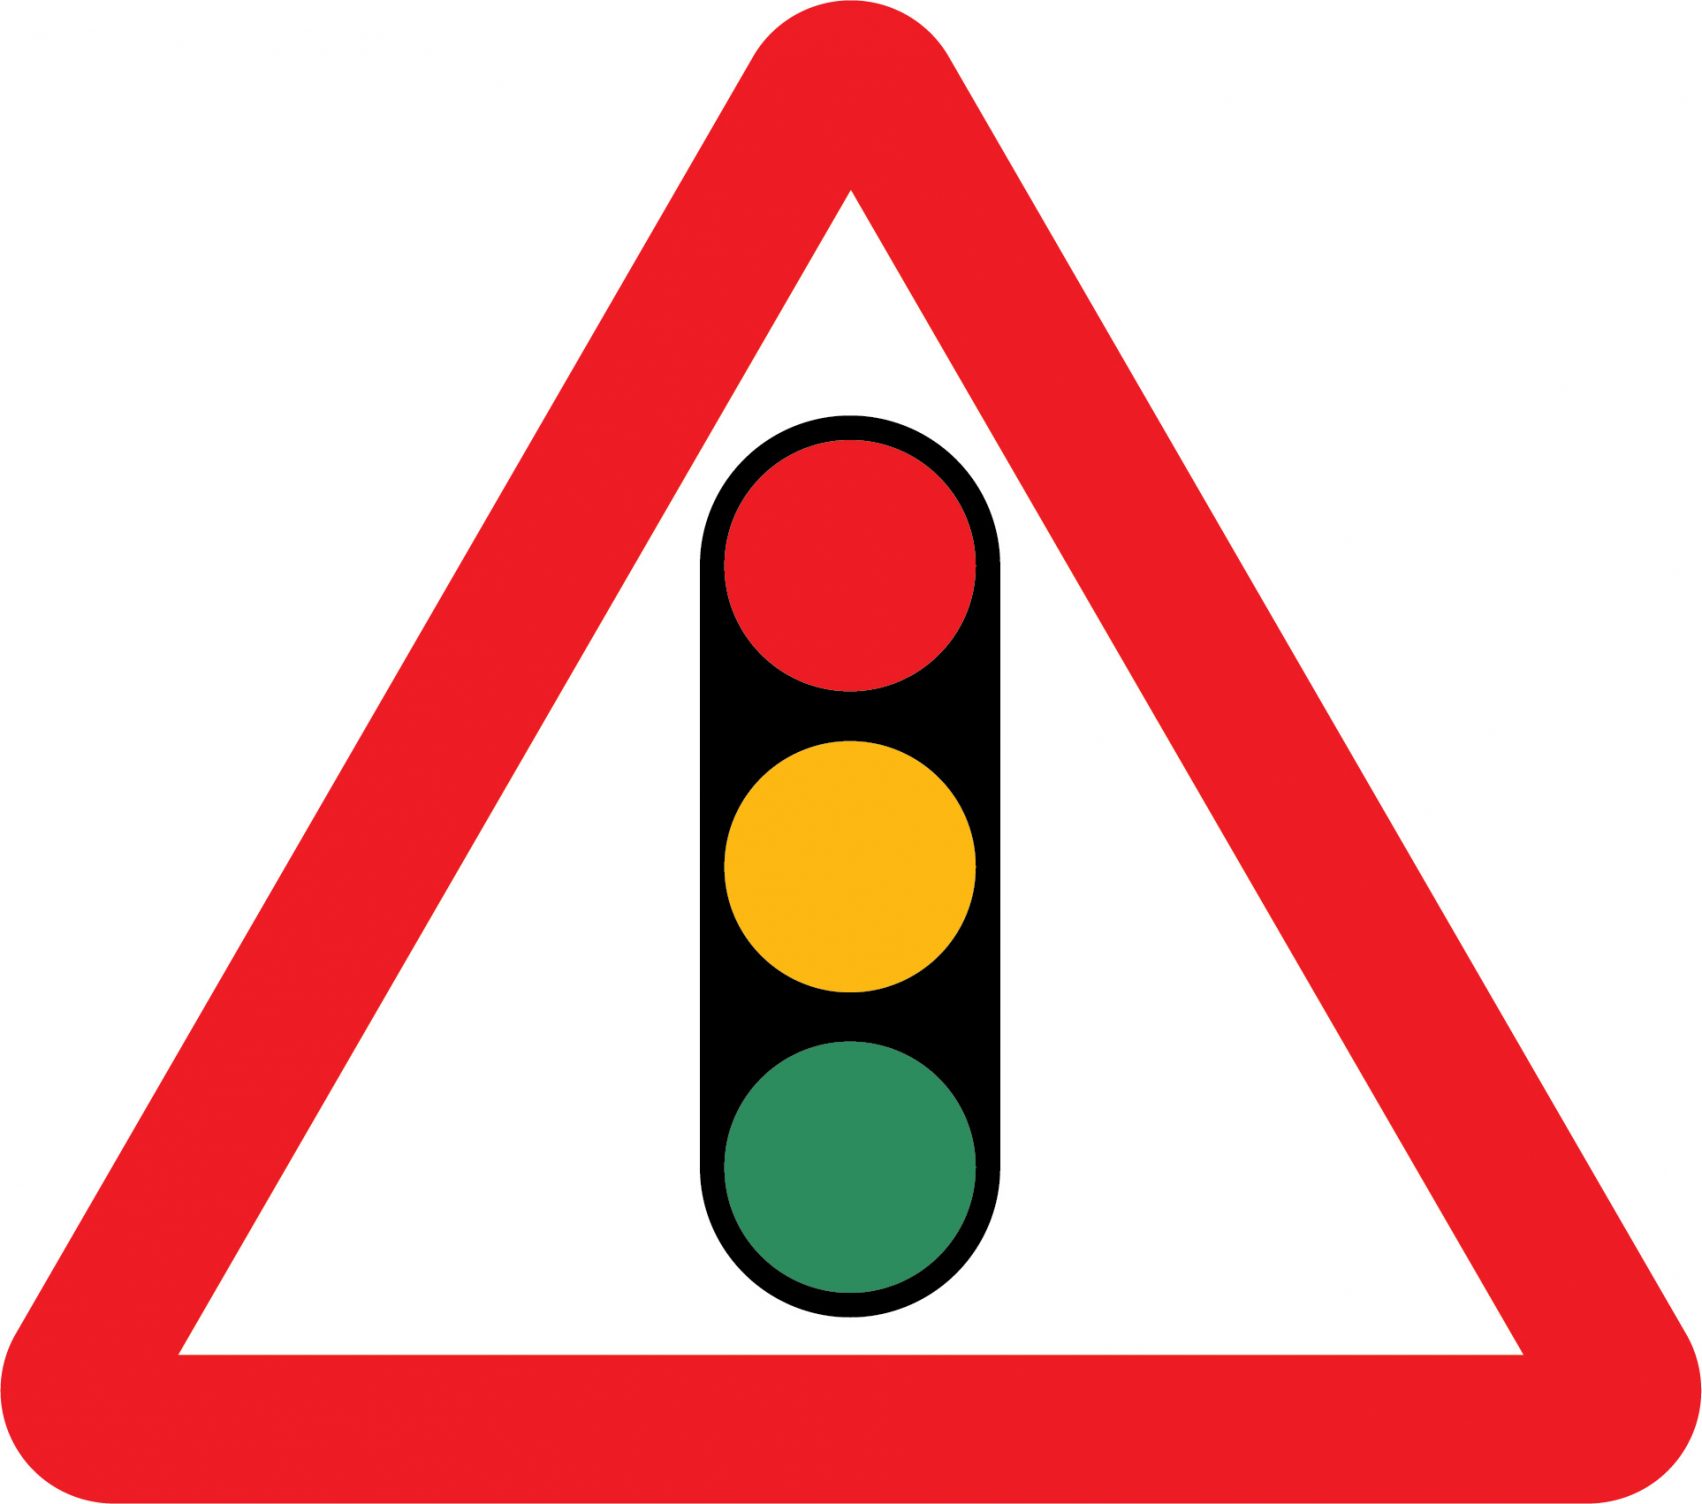 Traffic signals road sign Road Traffic Warning We Do Safety Signs